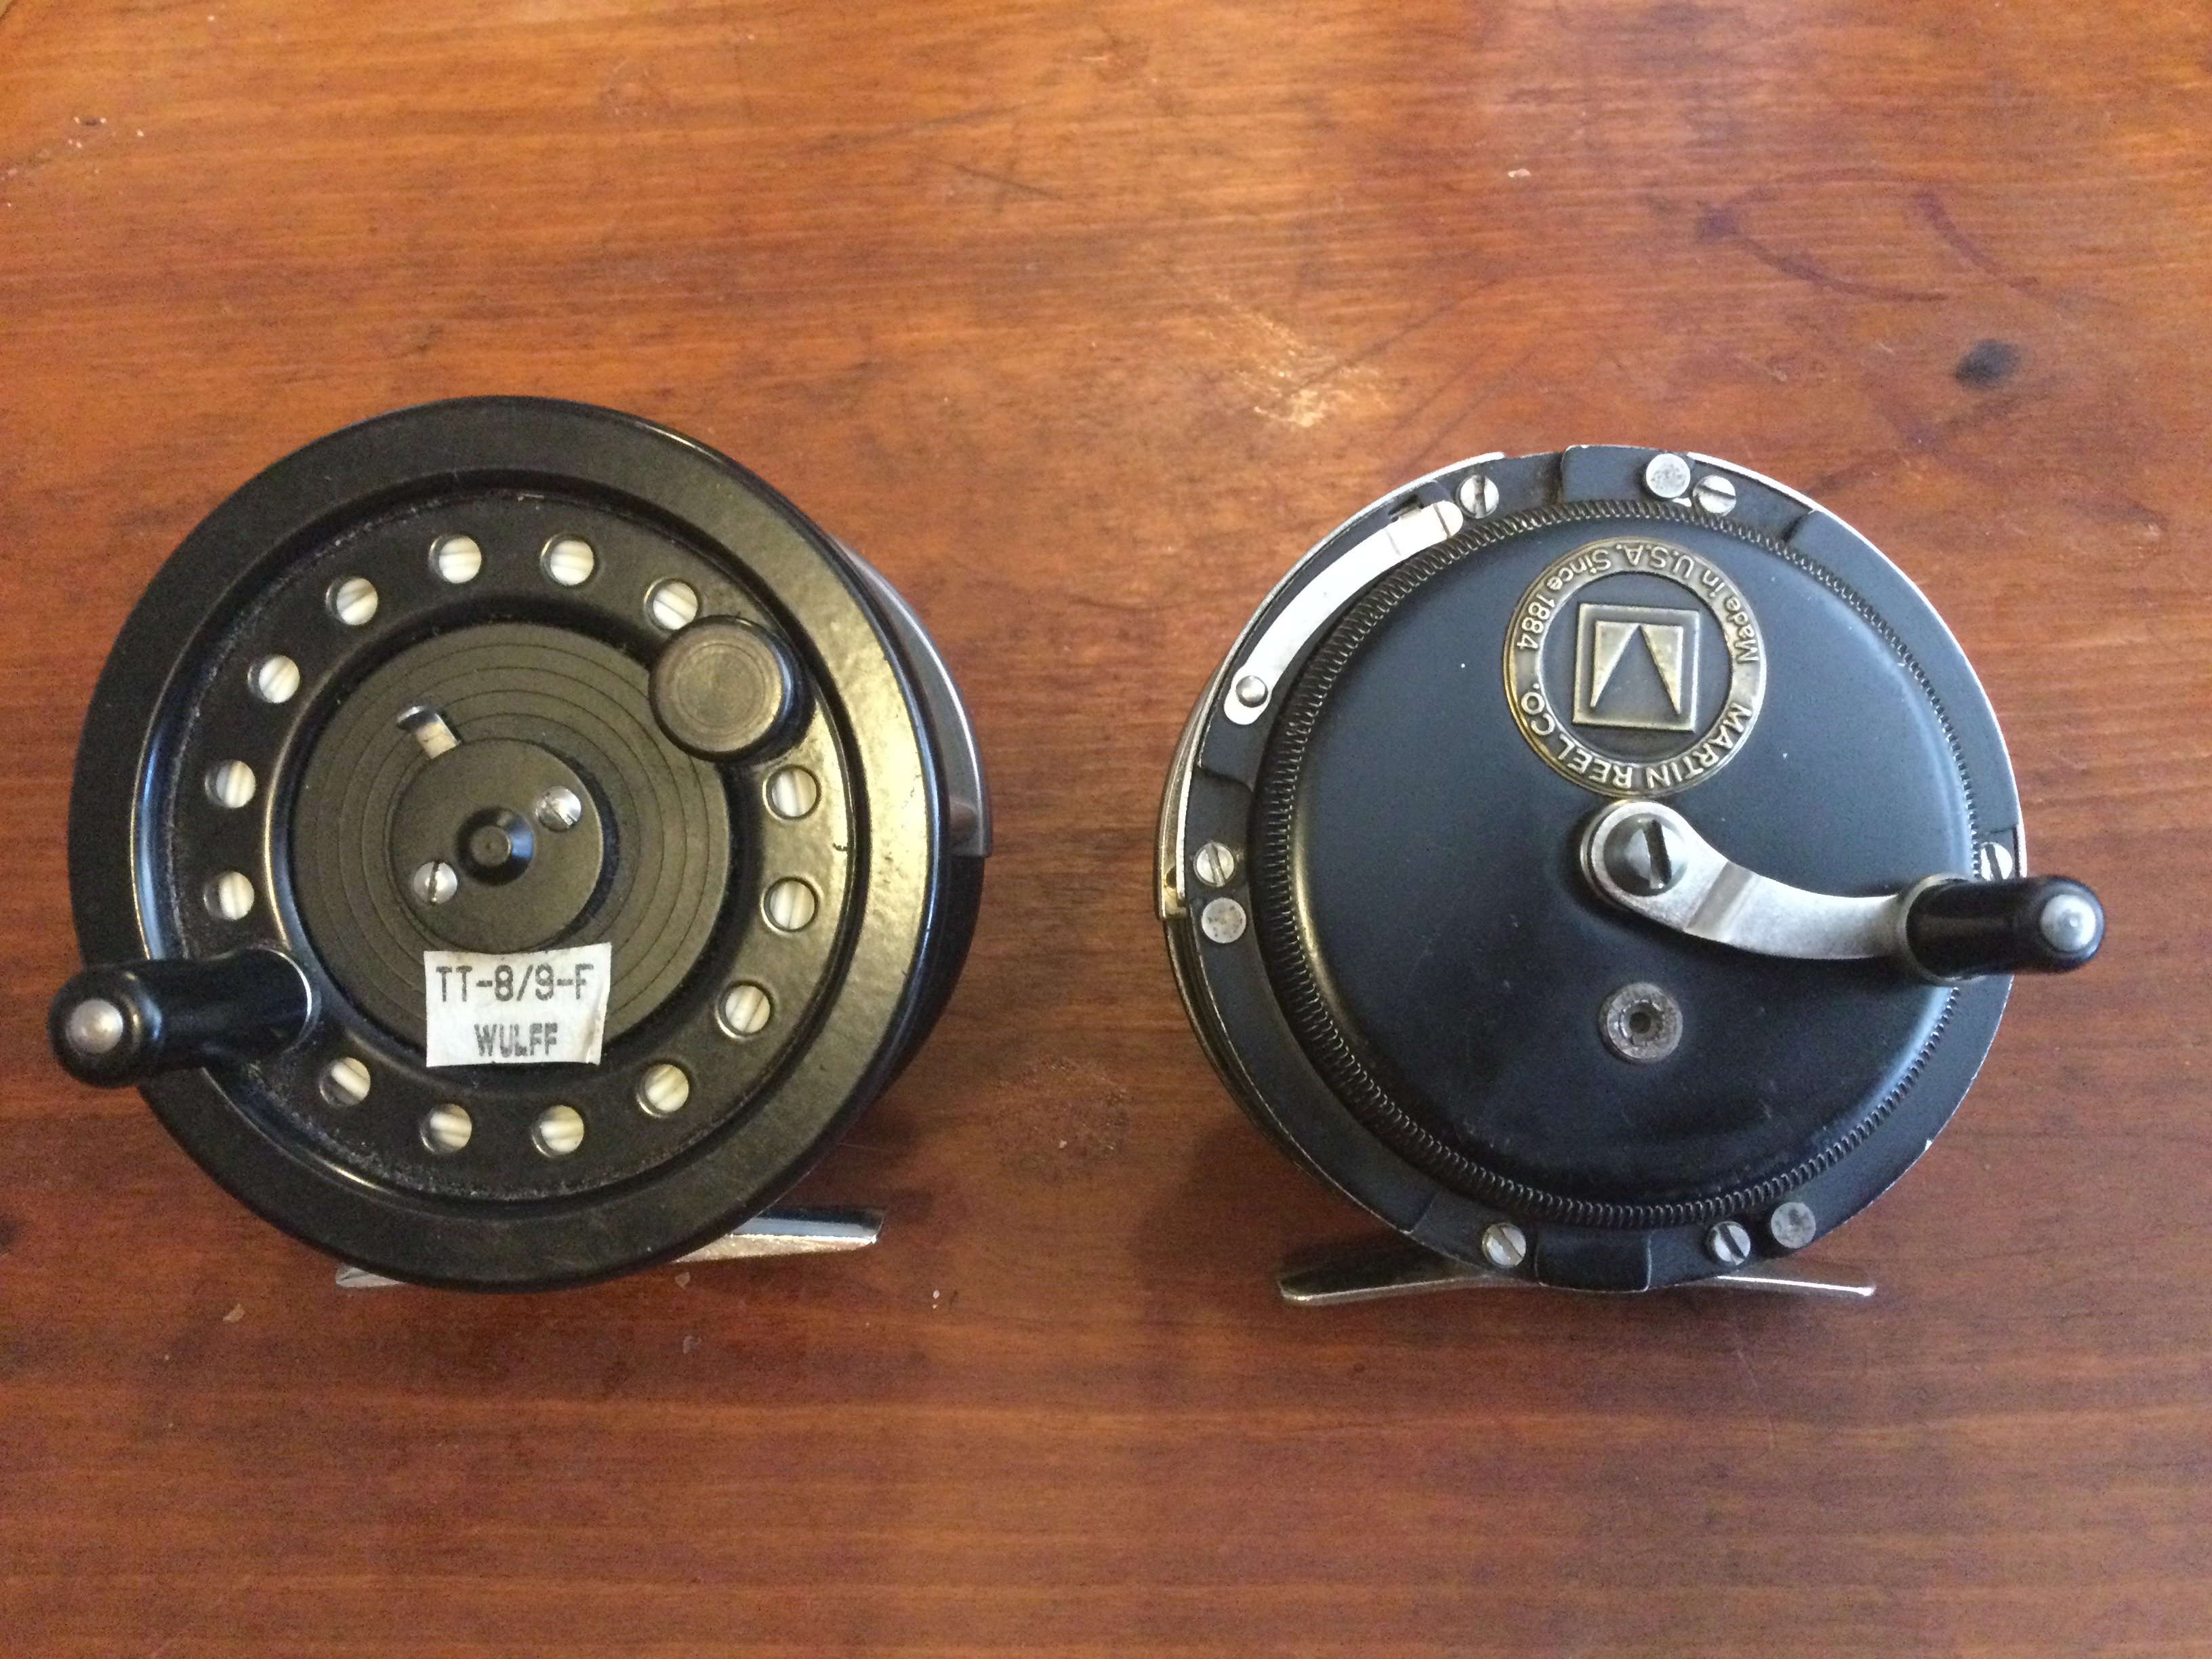 Martin Trophy SD-910 Fly fishing Reel & Extra Spool both with